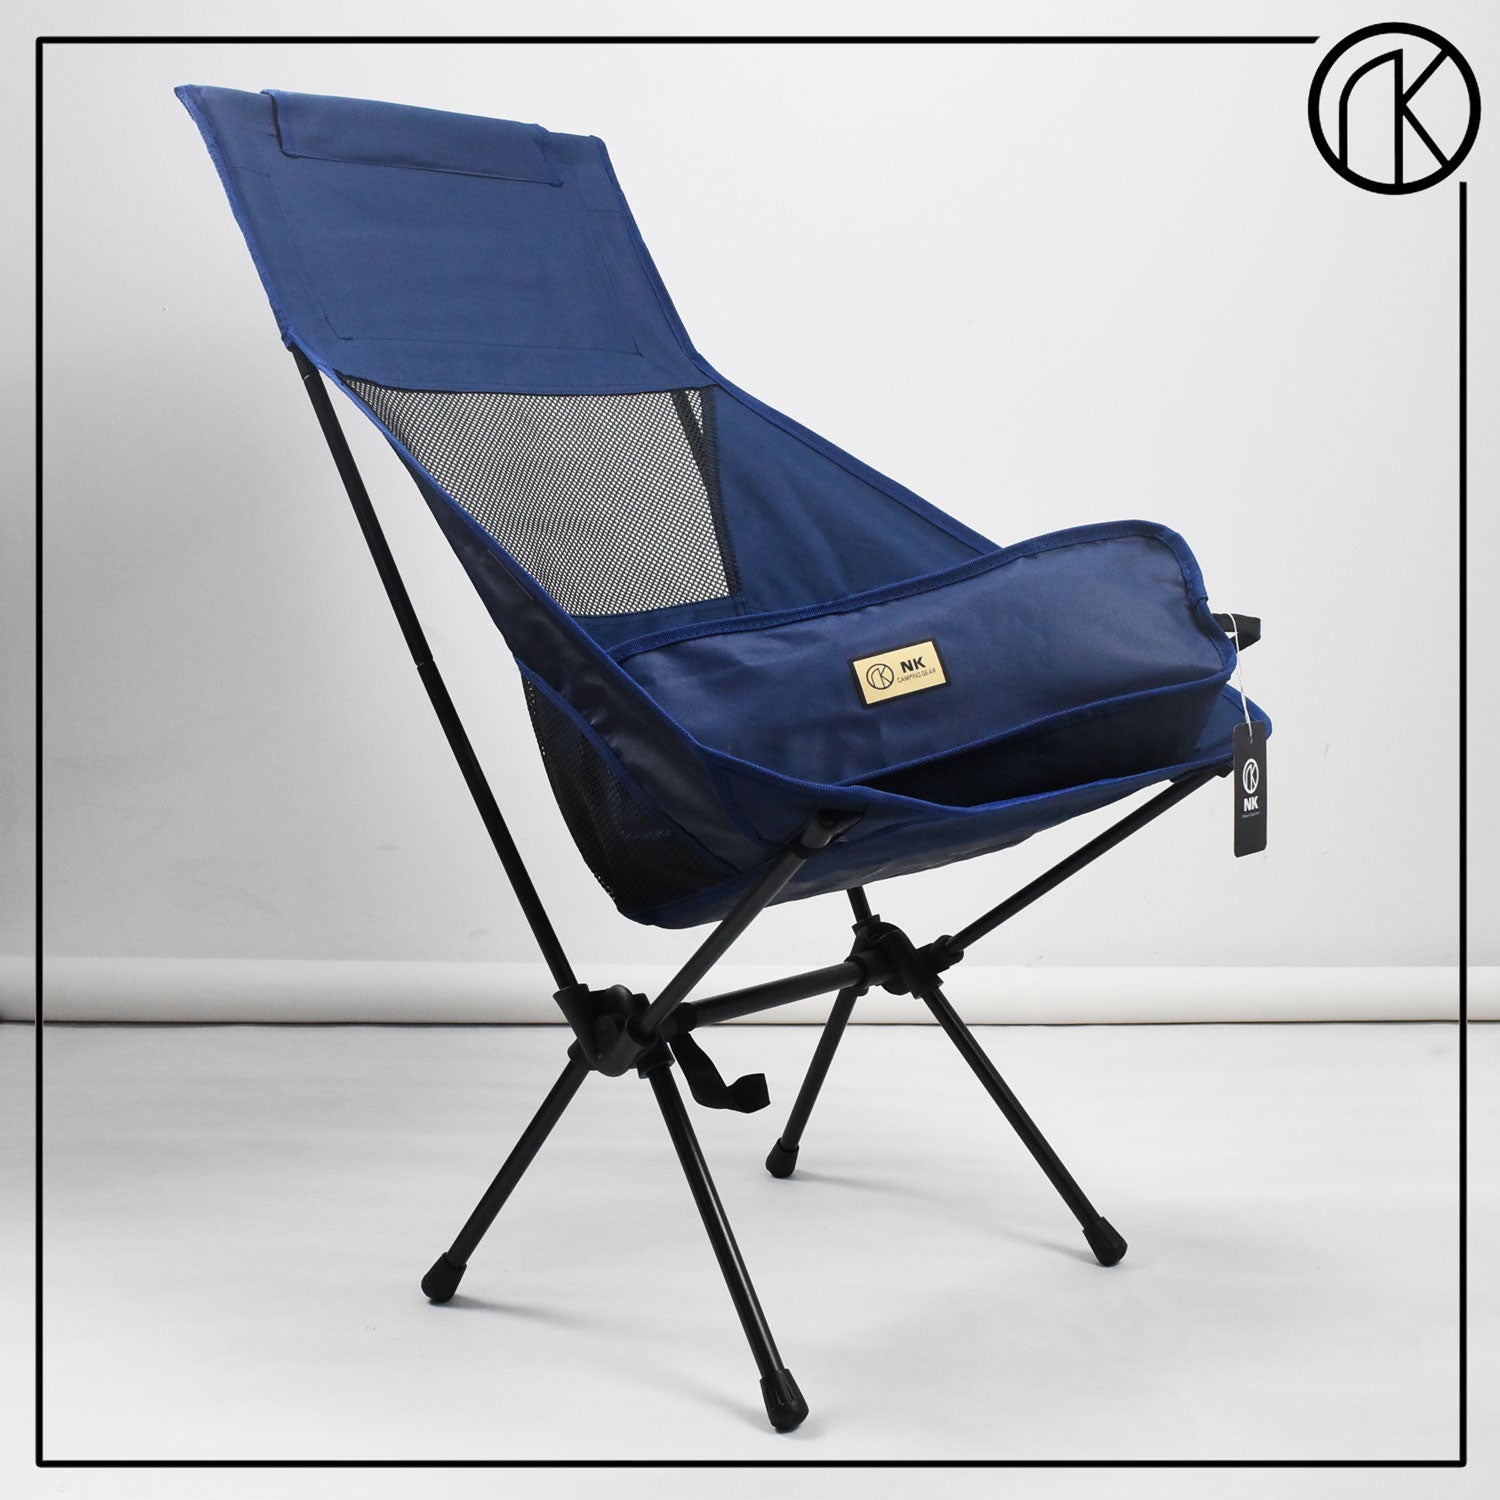 NK Outdoor Foldable Camping Chair (6 Versions)